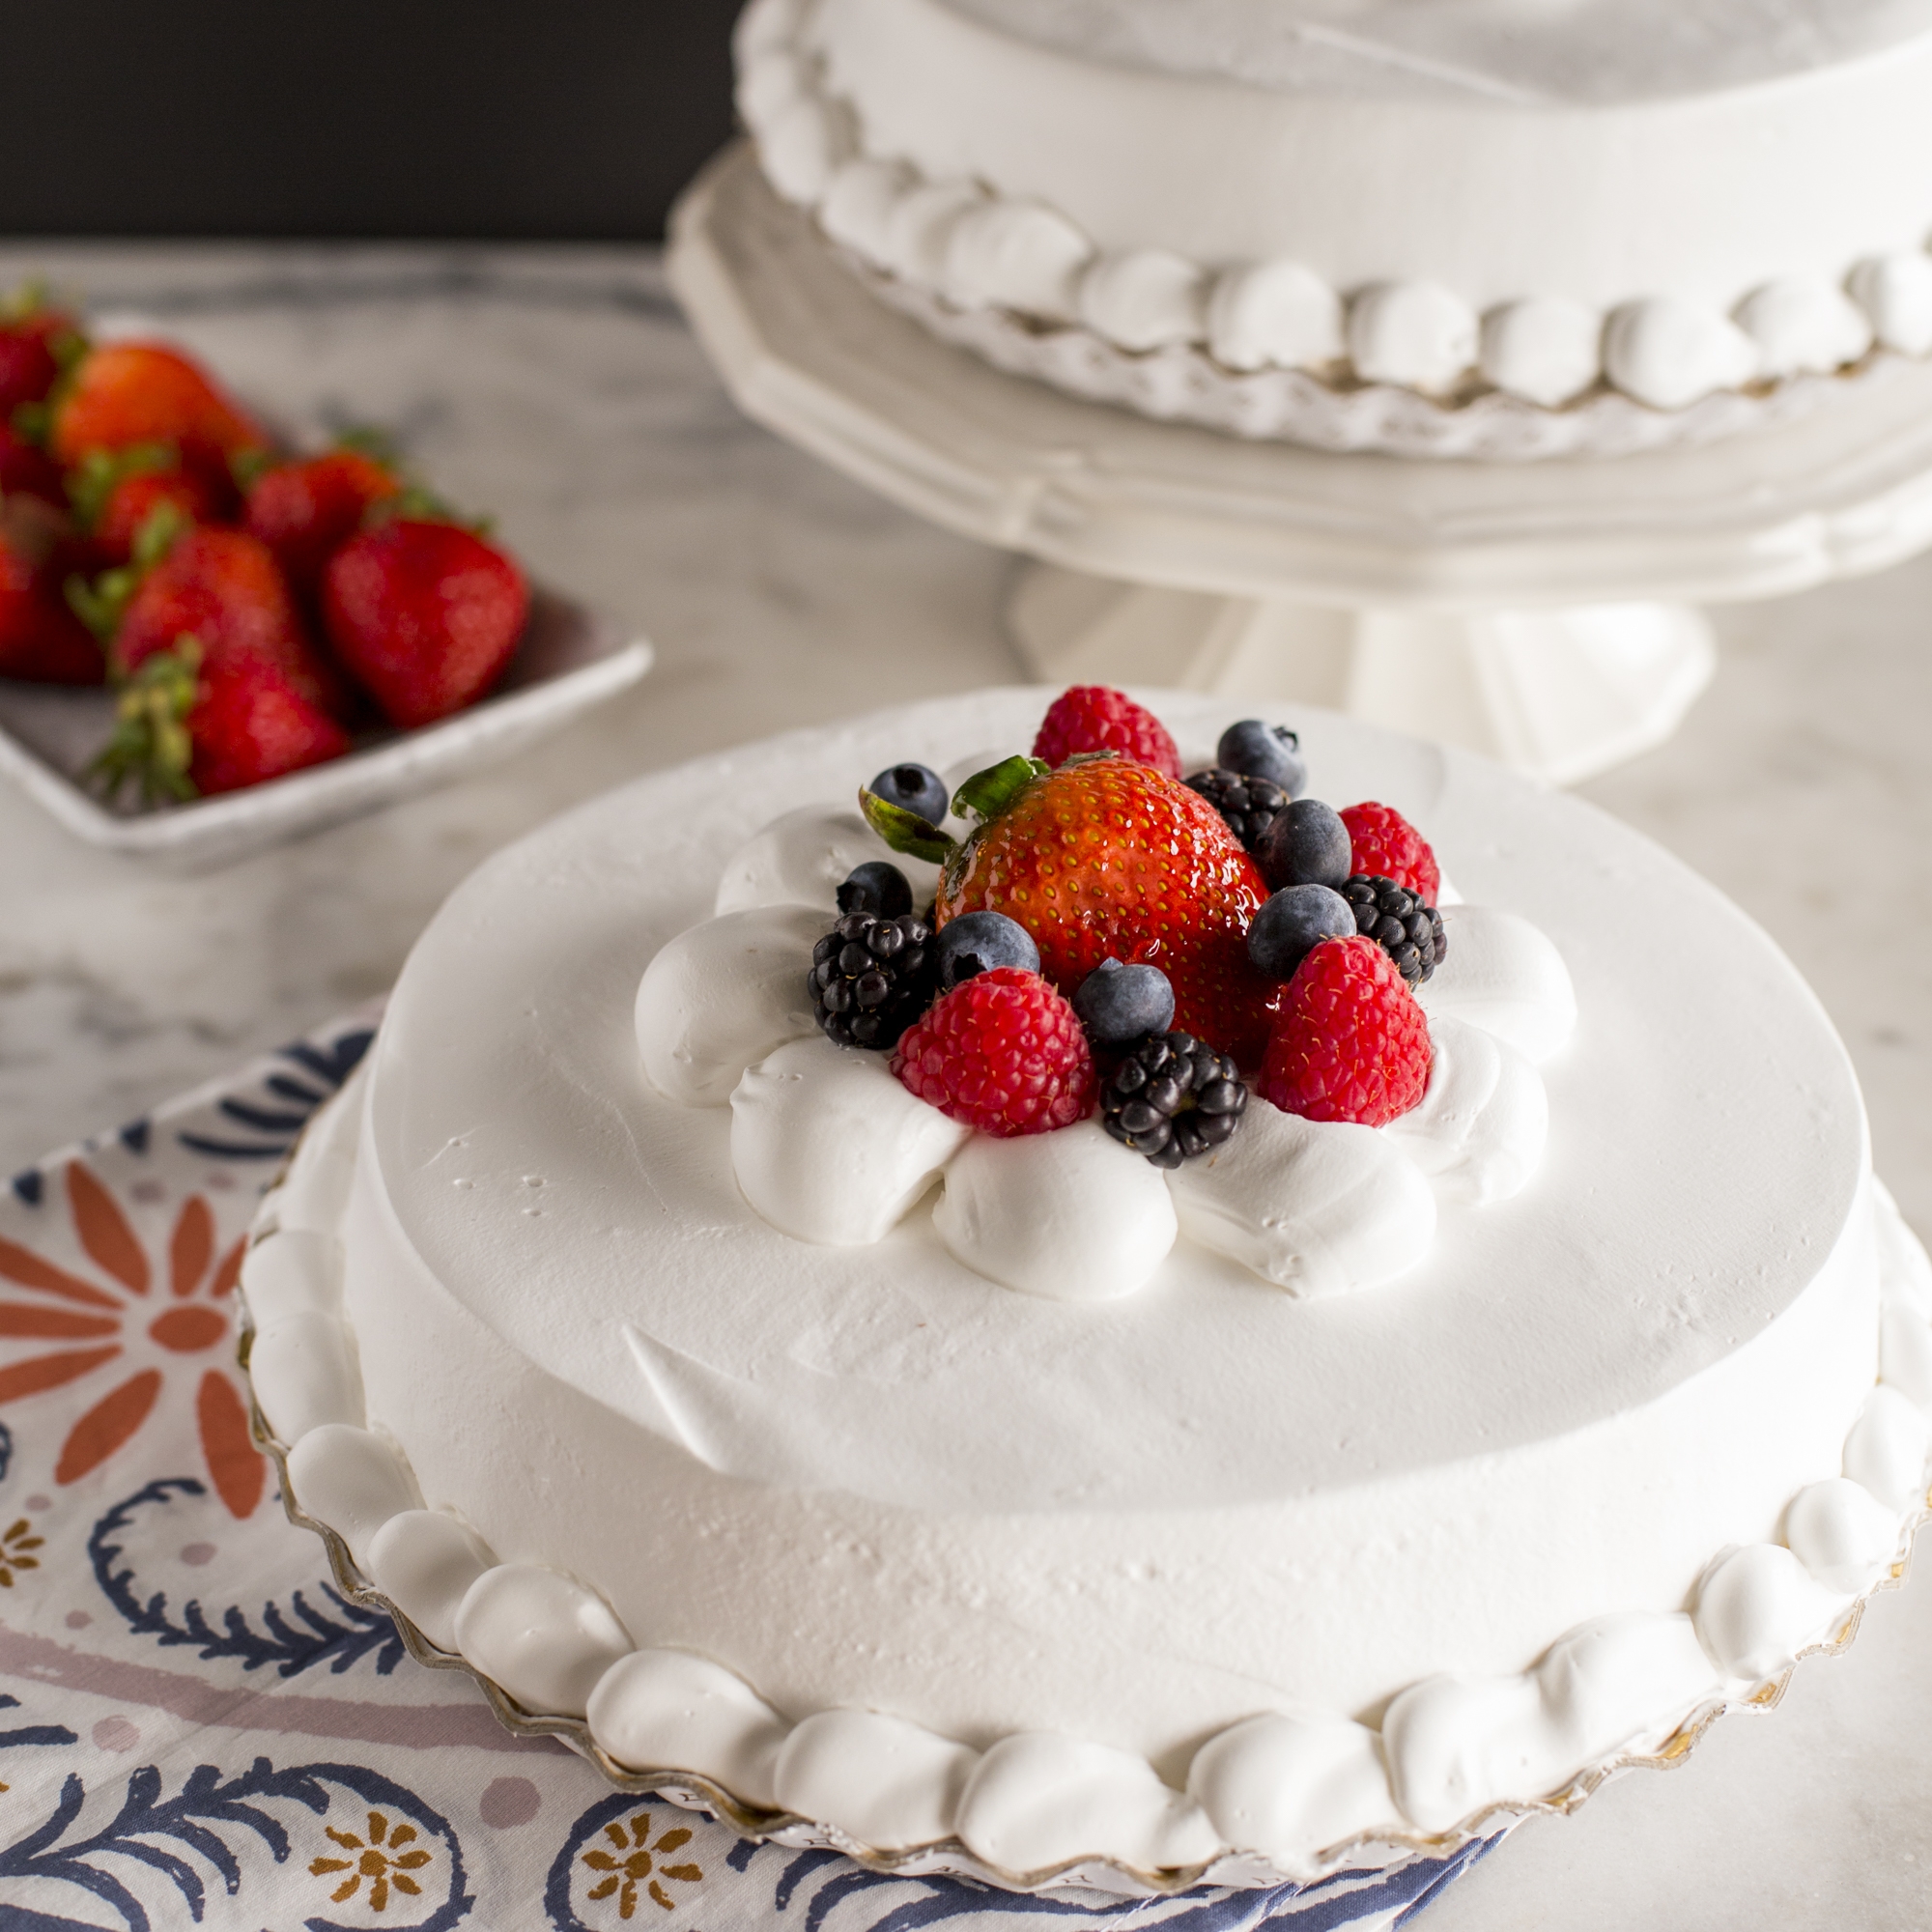 Katella Bakery specialty cake with fresh berries